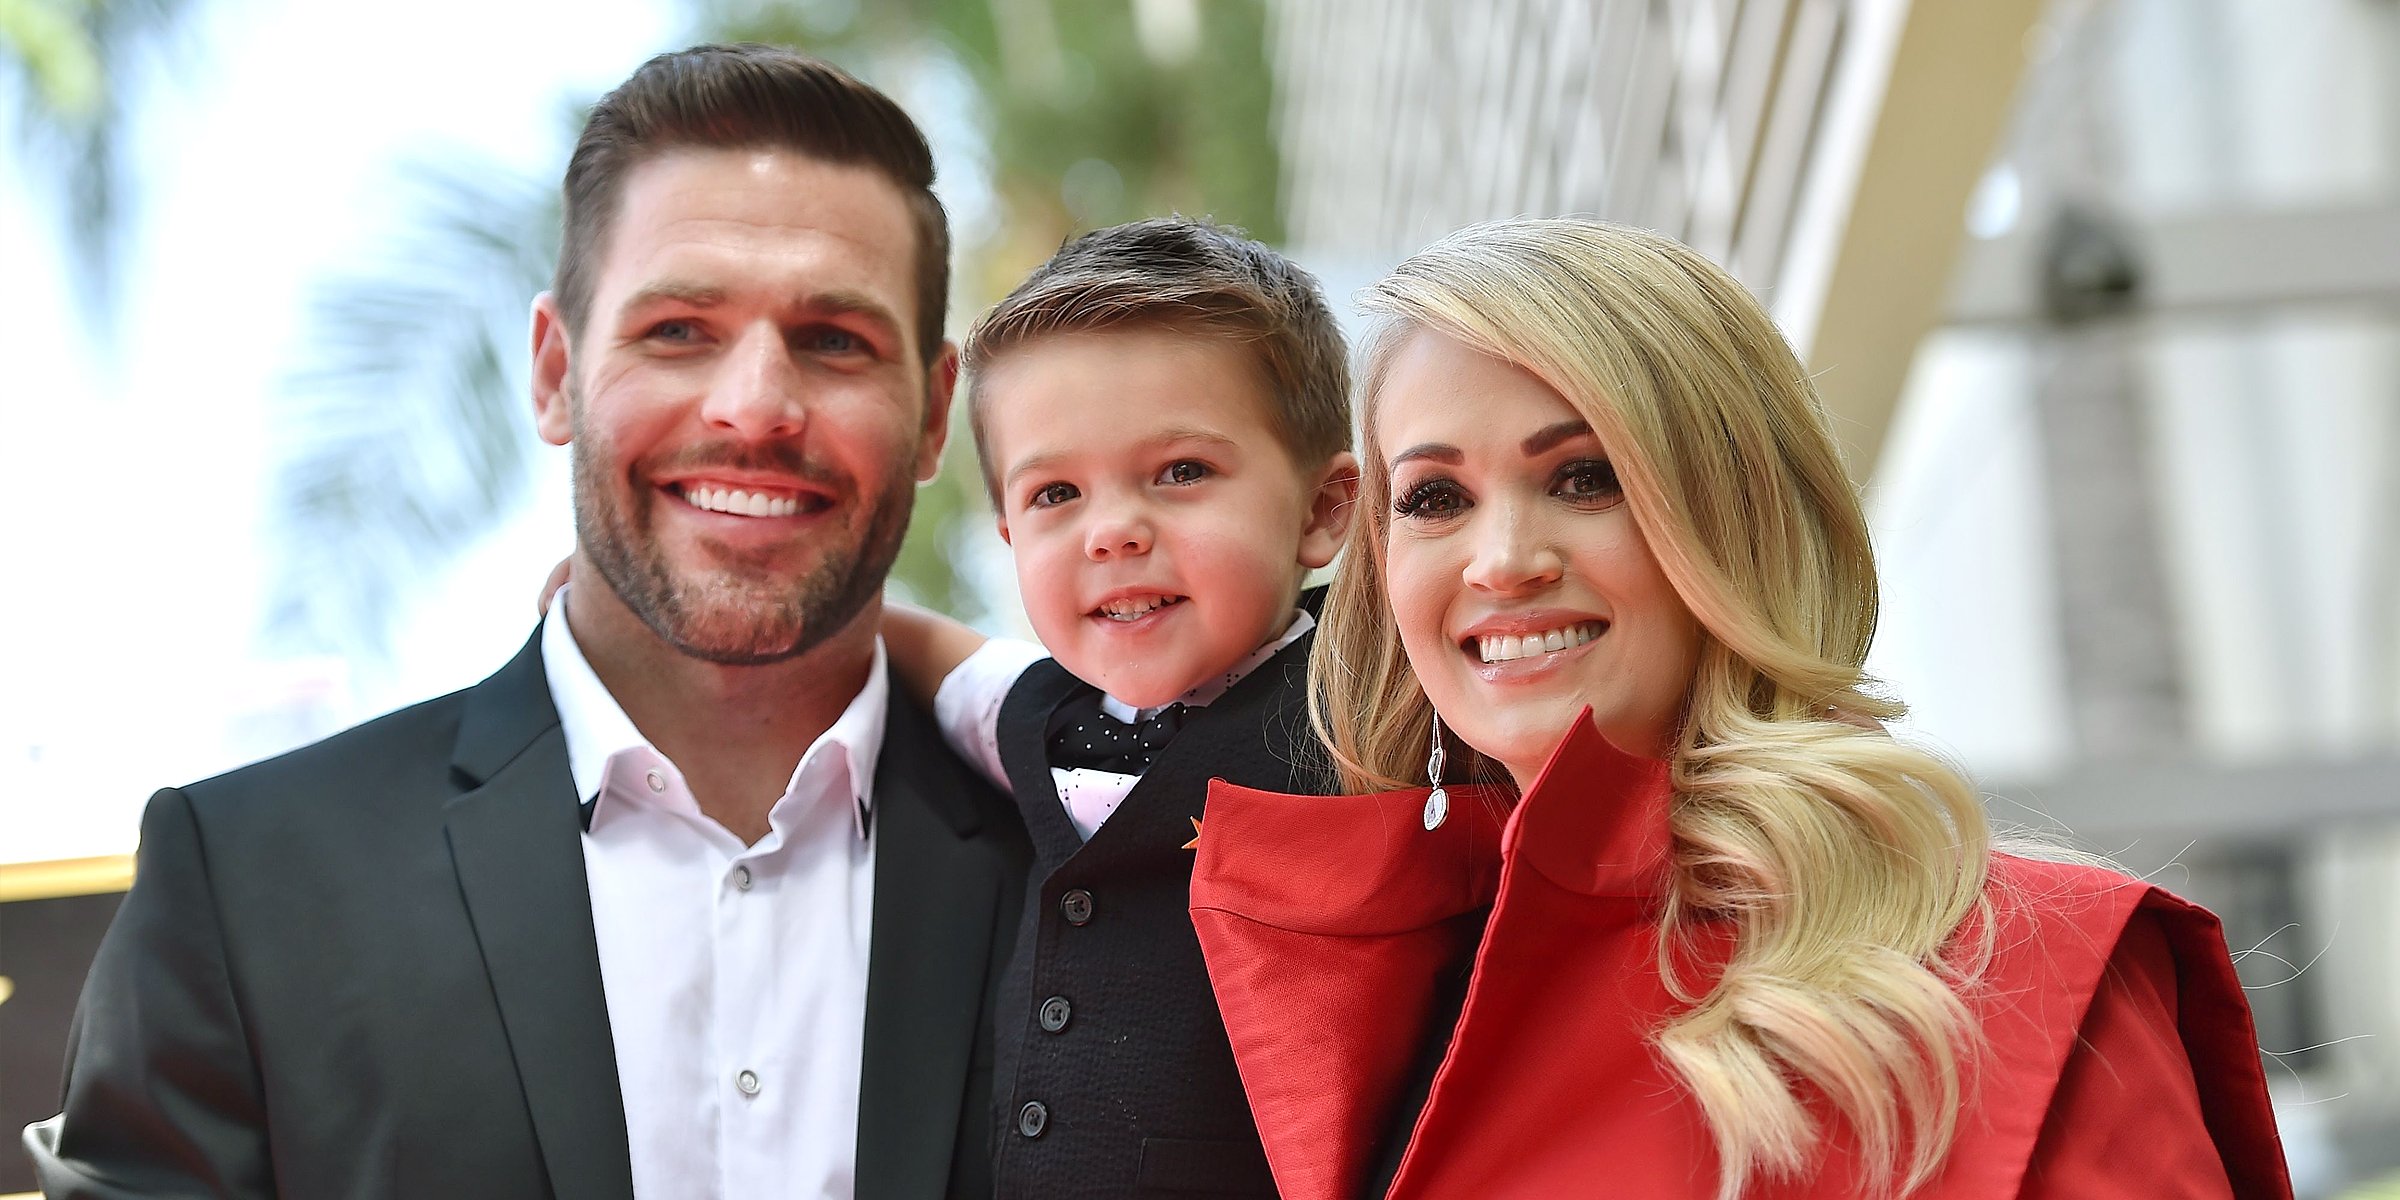 Mike Fisher, Isaiah Fisher and Carrie Underwood, 2018 | Source: Getty Images